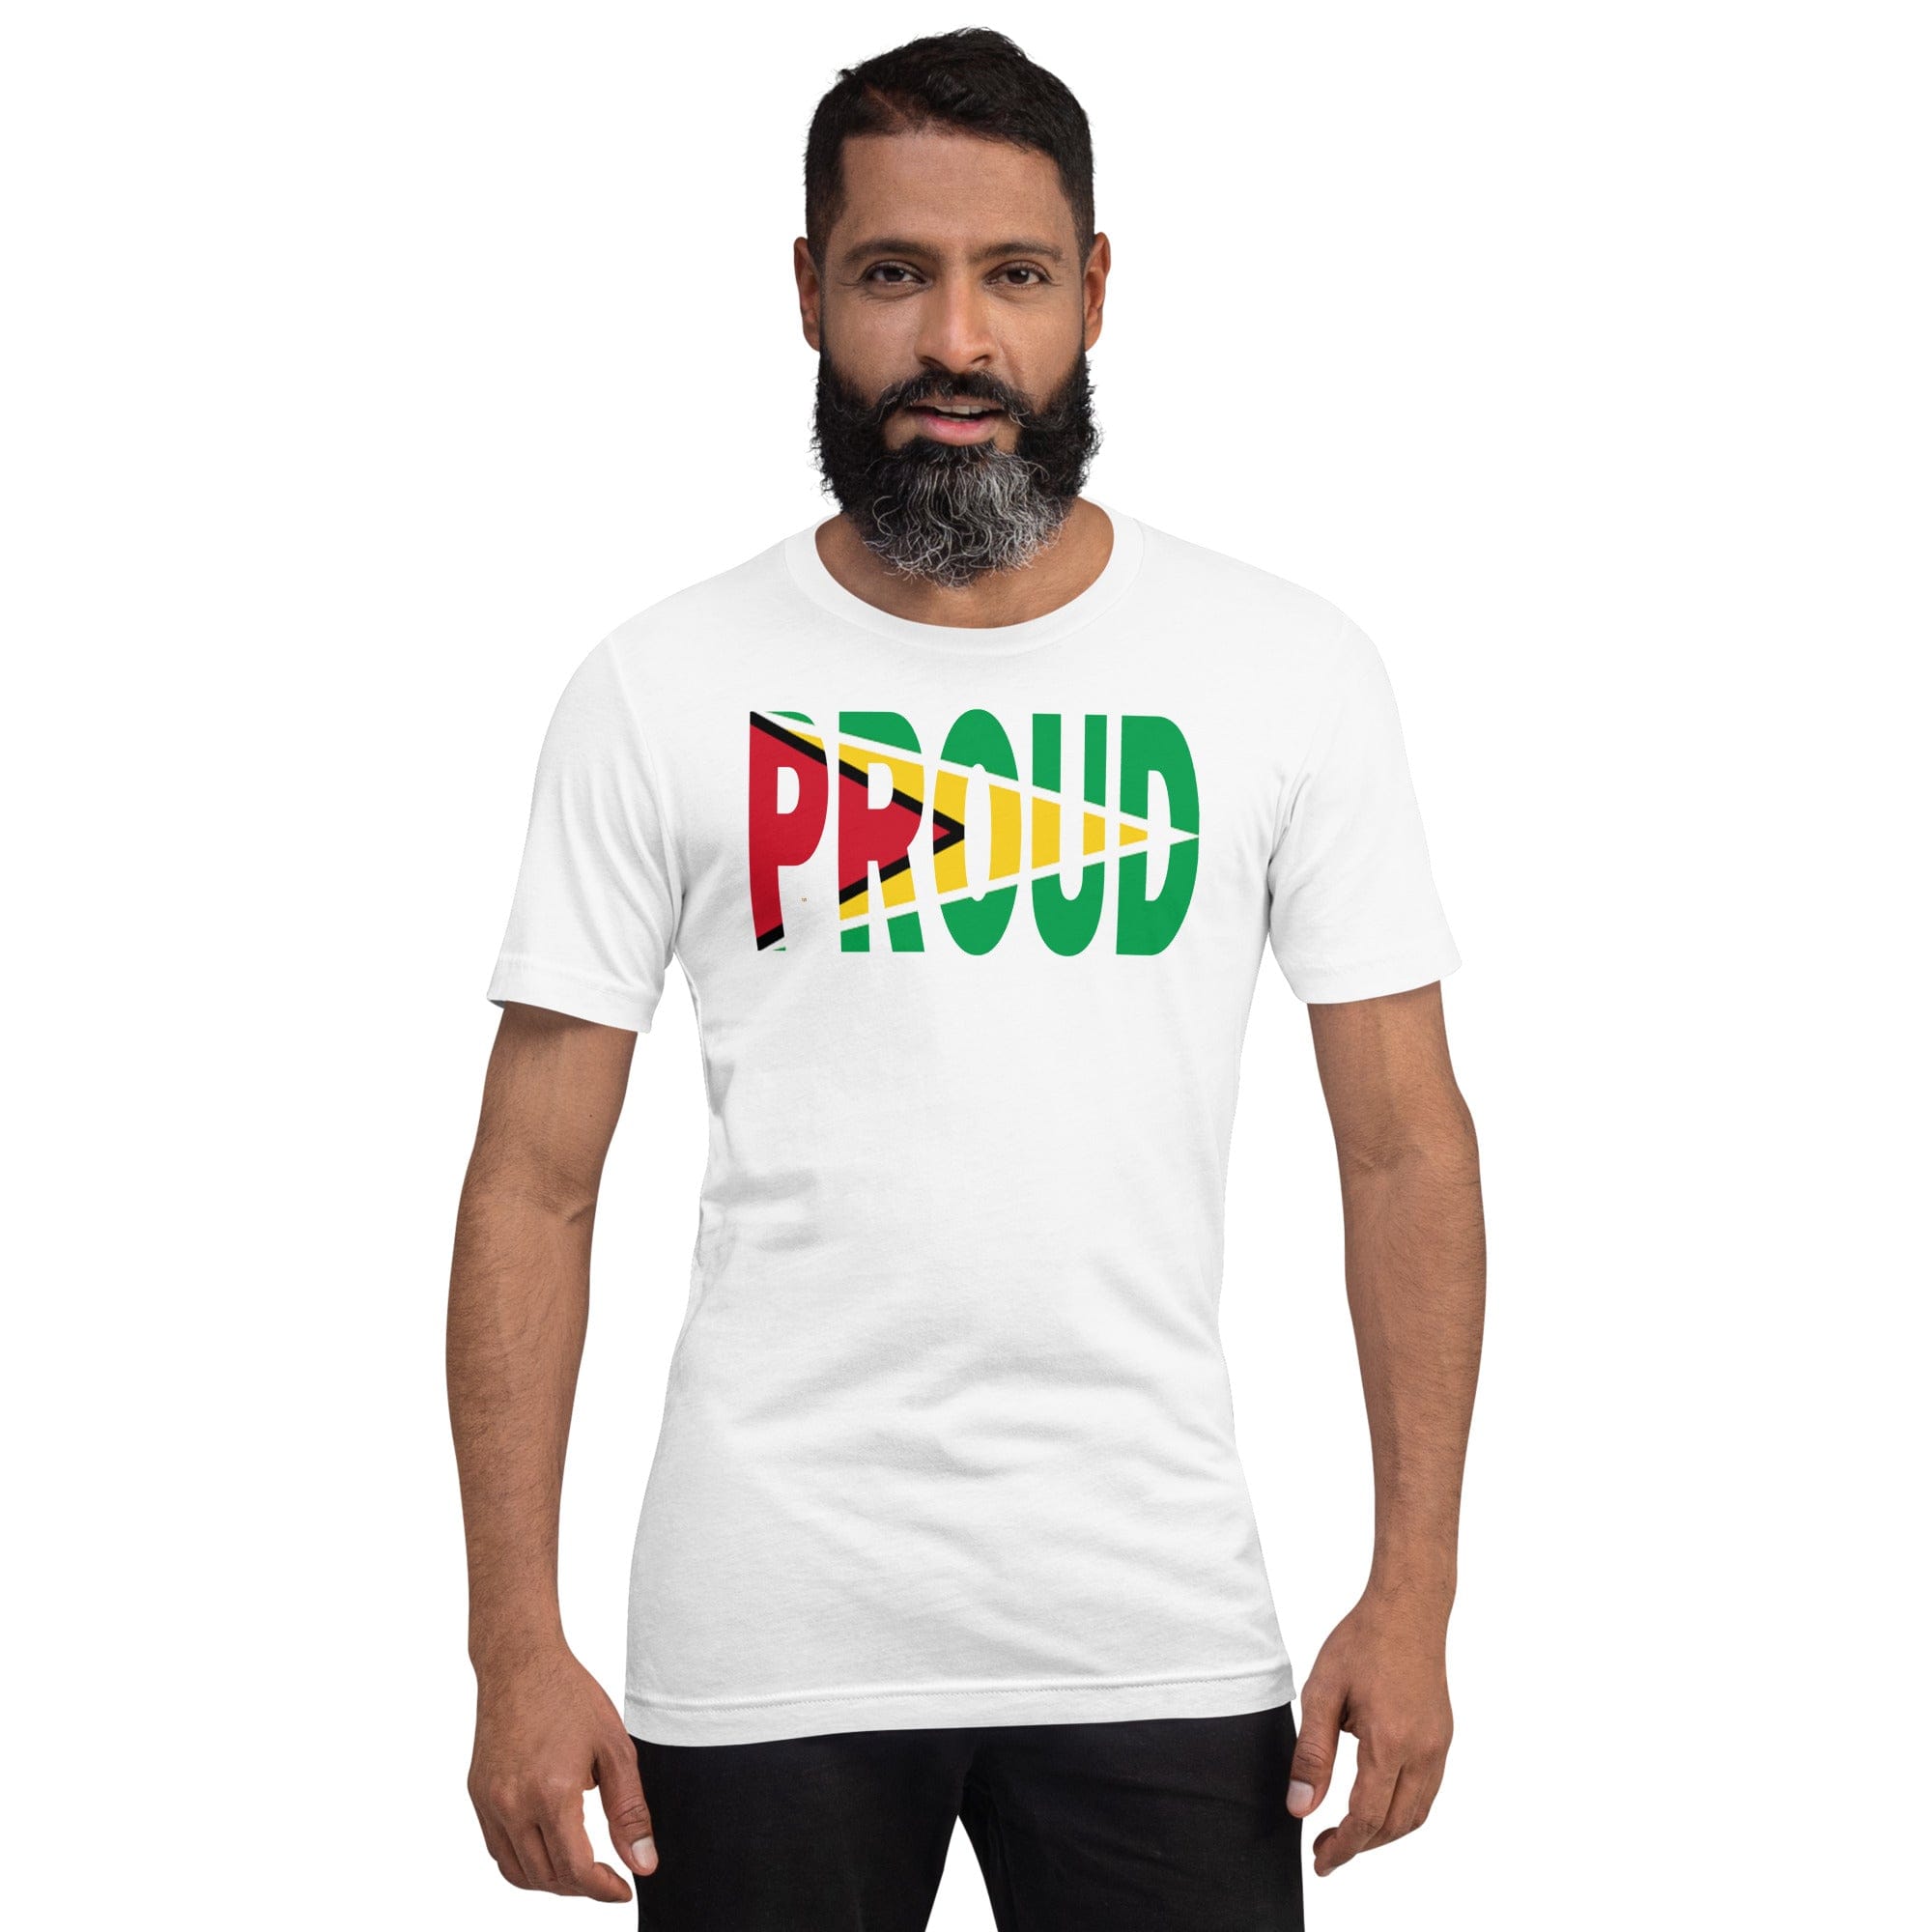 Guyana Flag designed to spell Proud on a white color t-shirt worn by a black man.